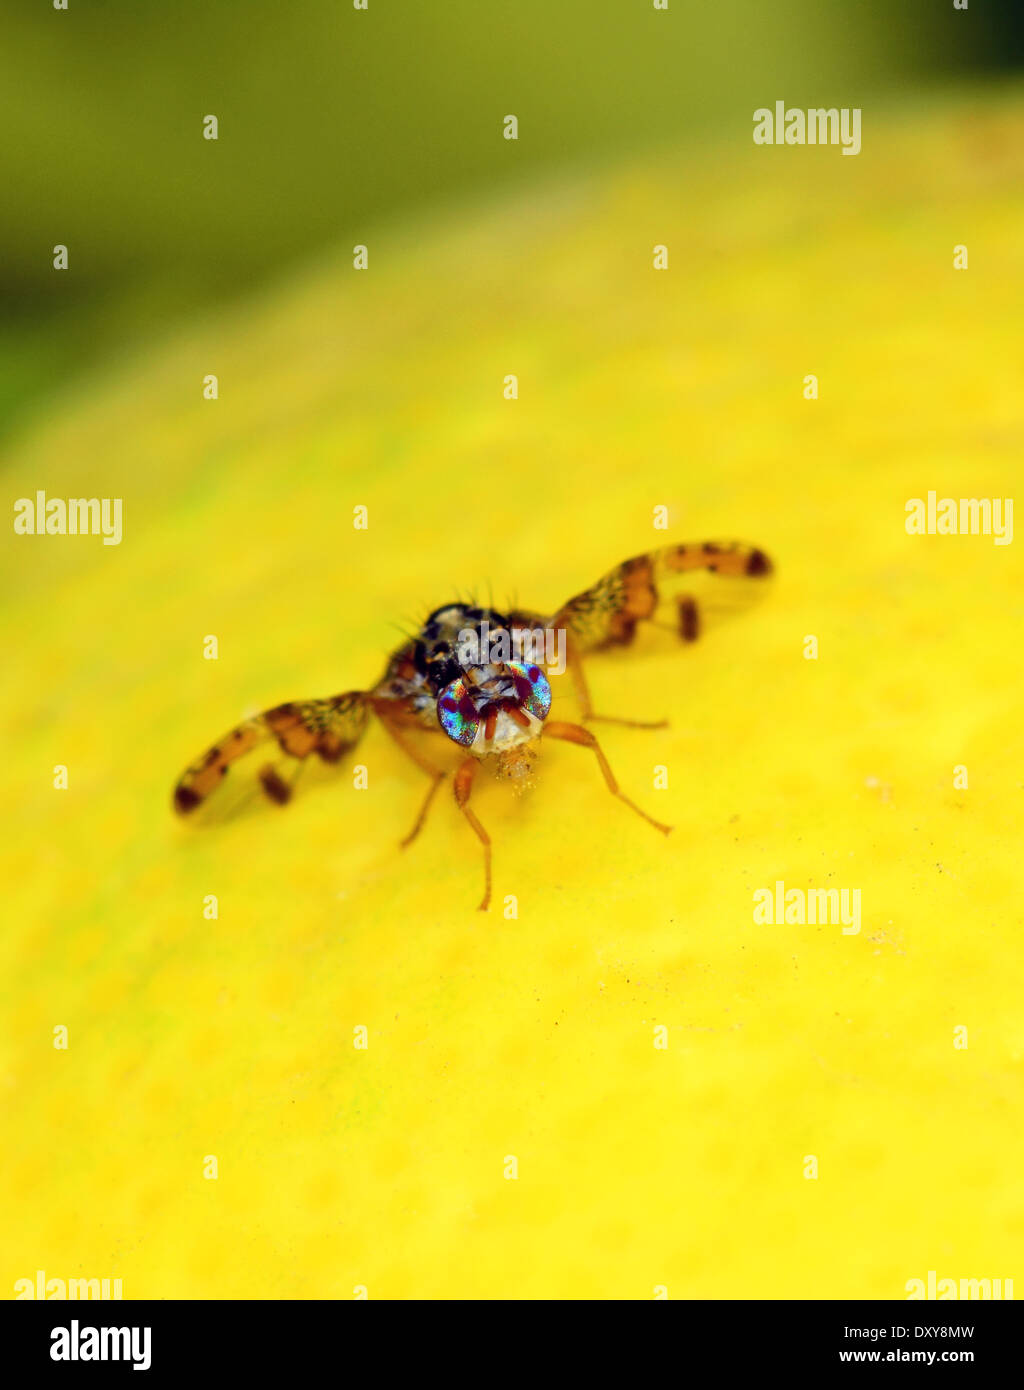 Fruit fly on lemon, Front view Stock Photo